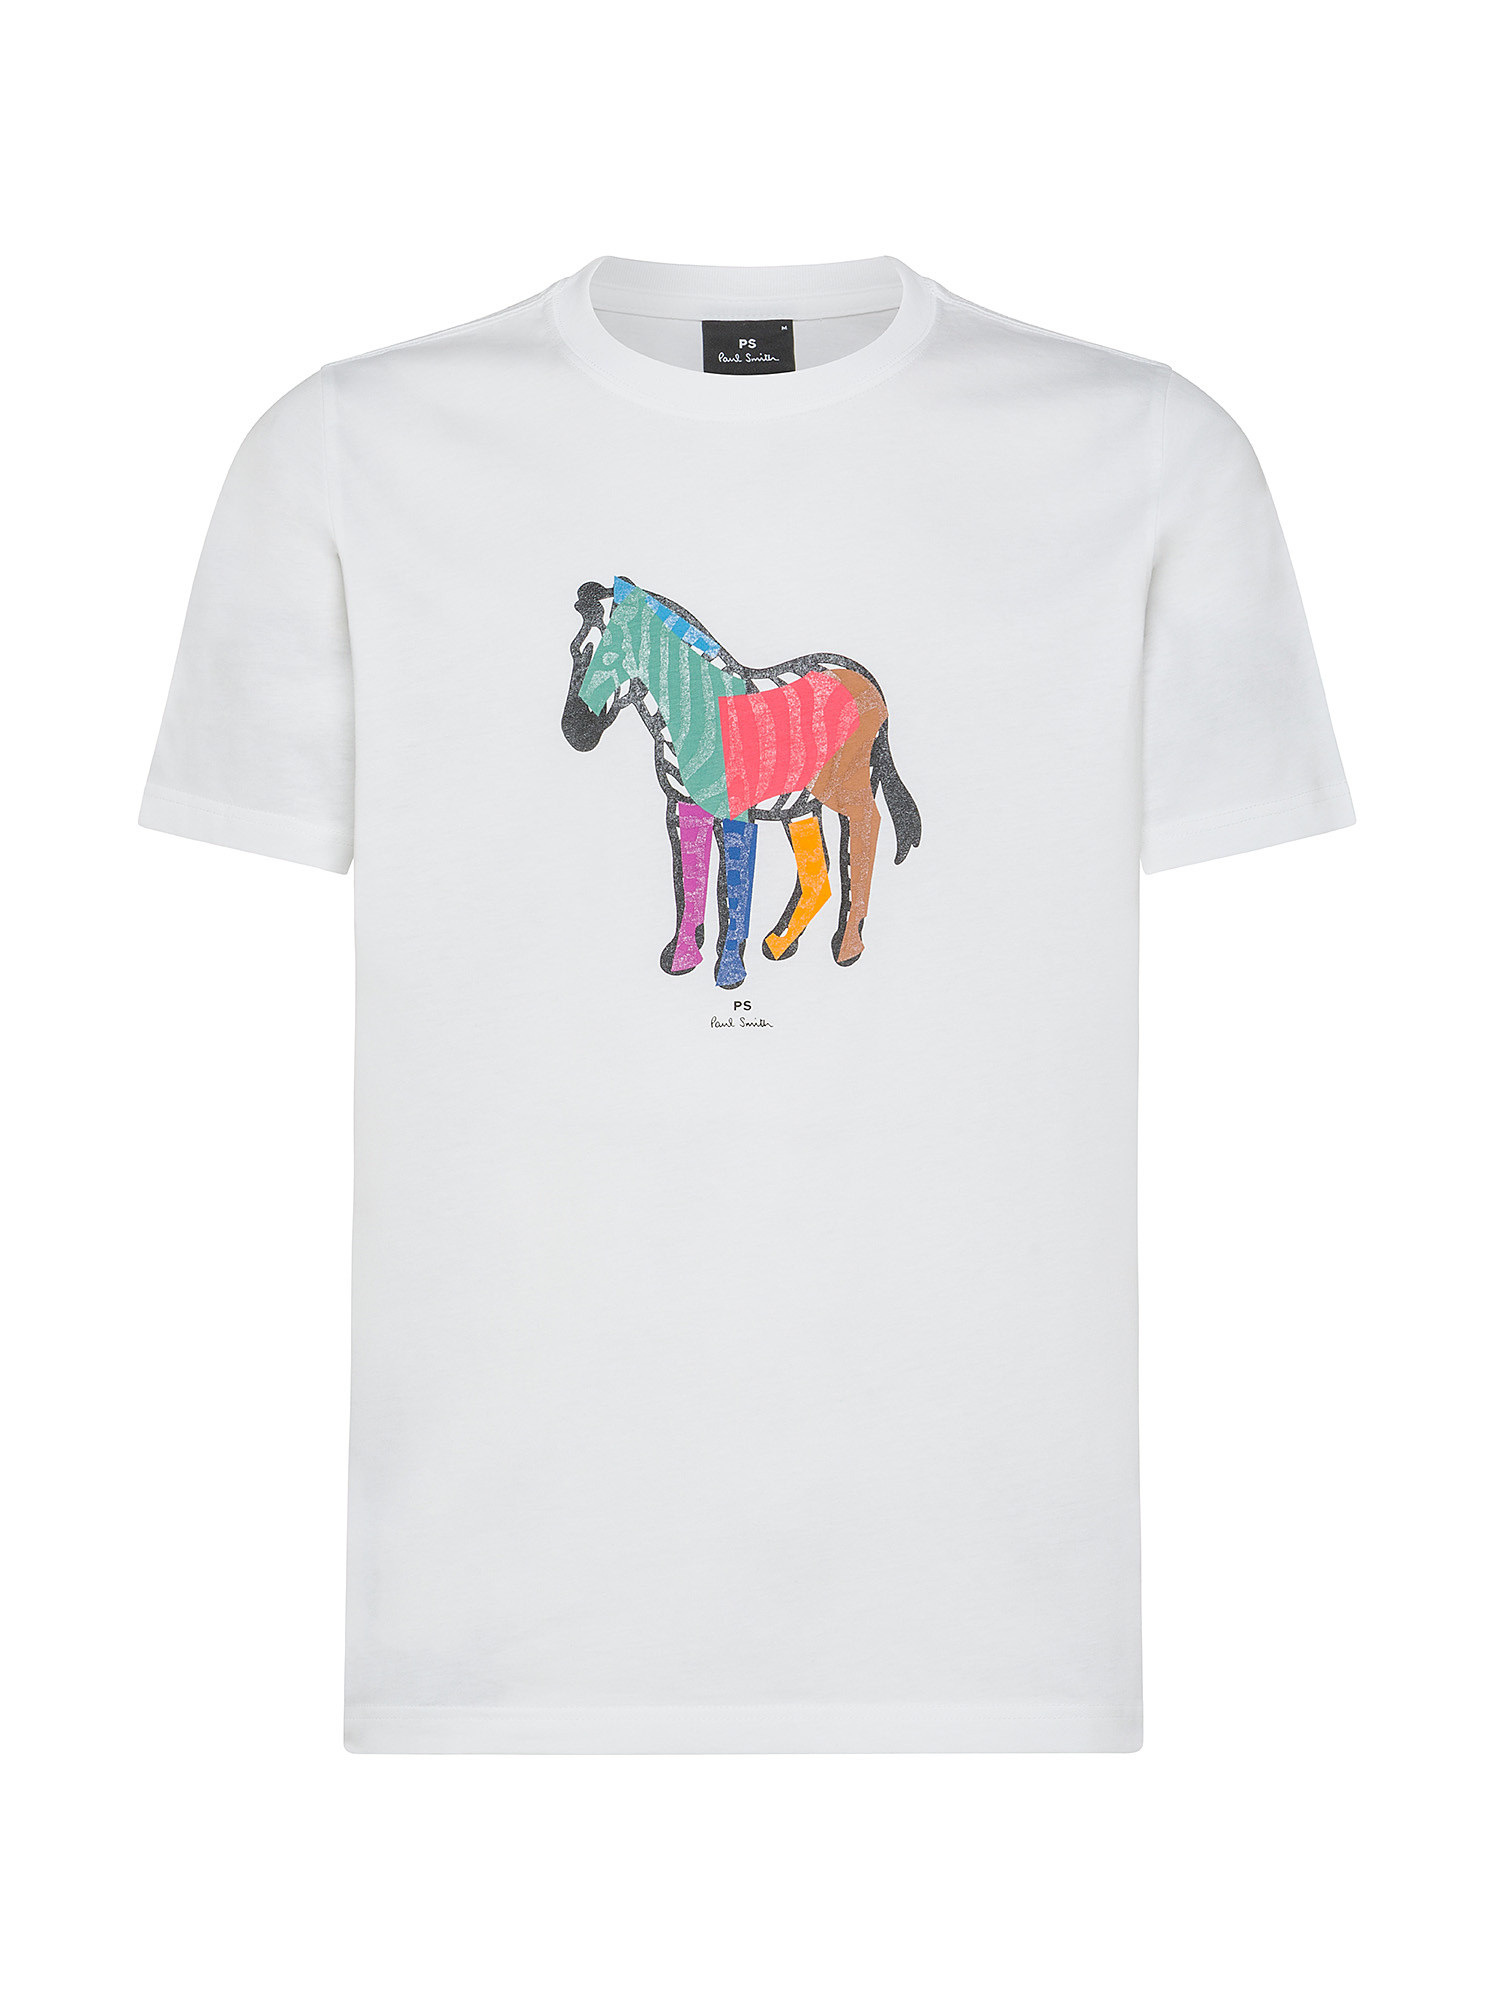 Paul Smith - T-shirt in cotone con stampa Zebra, Bianco, large image number 0